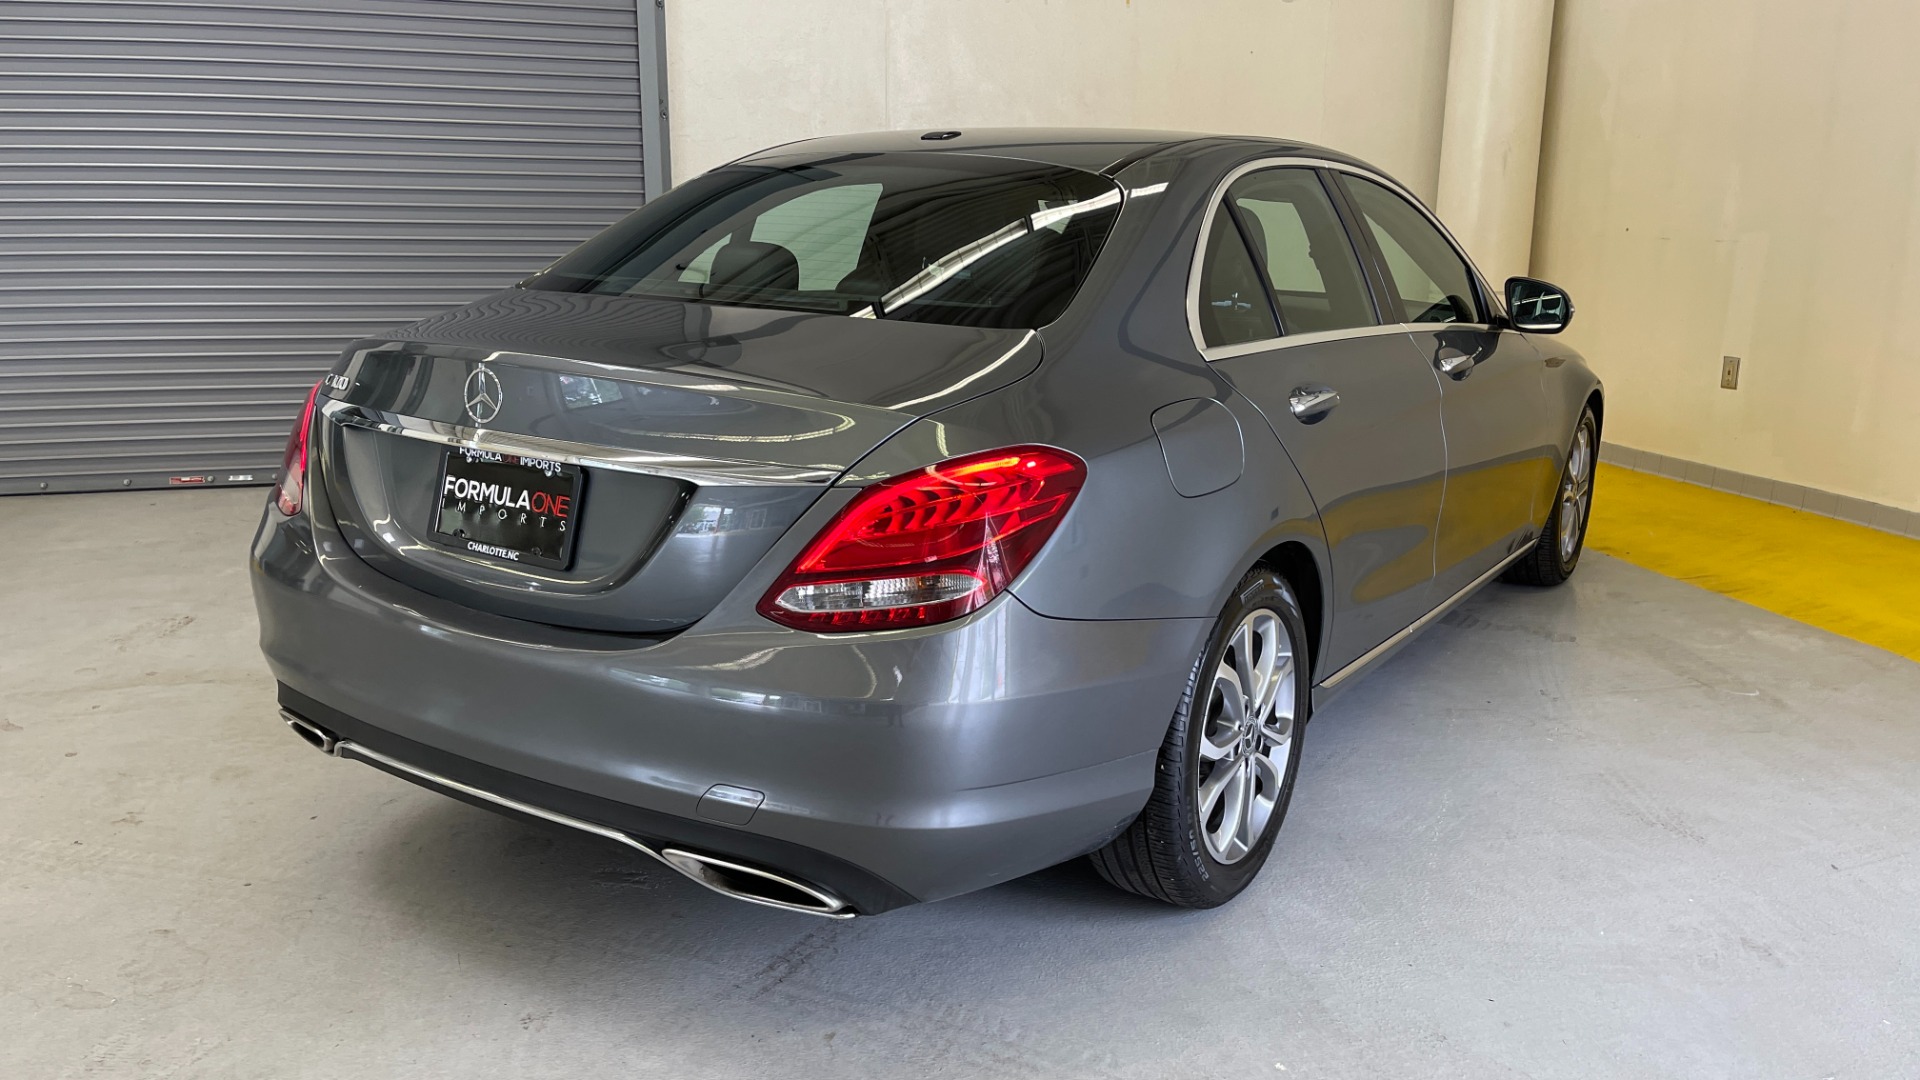 Used 2018 Mercedes-Benz C-CLASS C 300 PREMIUM / KEYLESS-GO / HTD STS / APPLE CARPLAY / REARVIEW for sale Sold at Formula Imports in Charlotte NC 28227 2